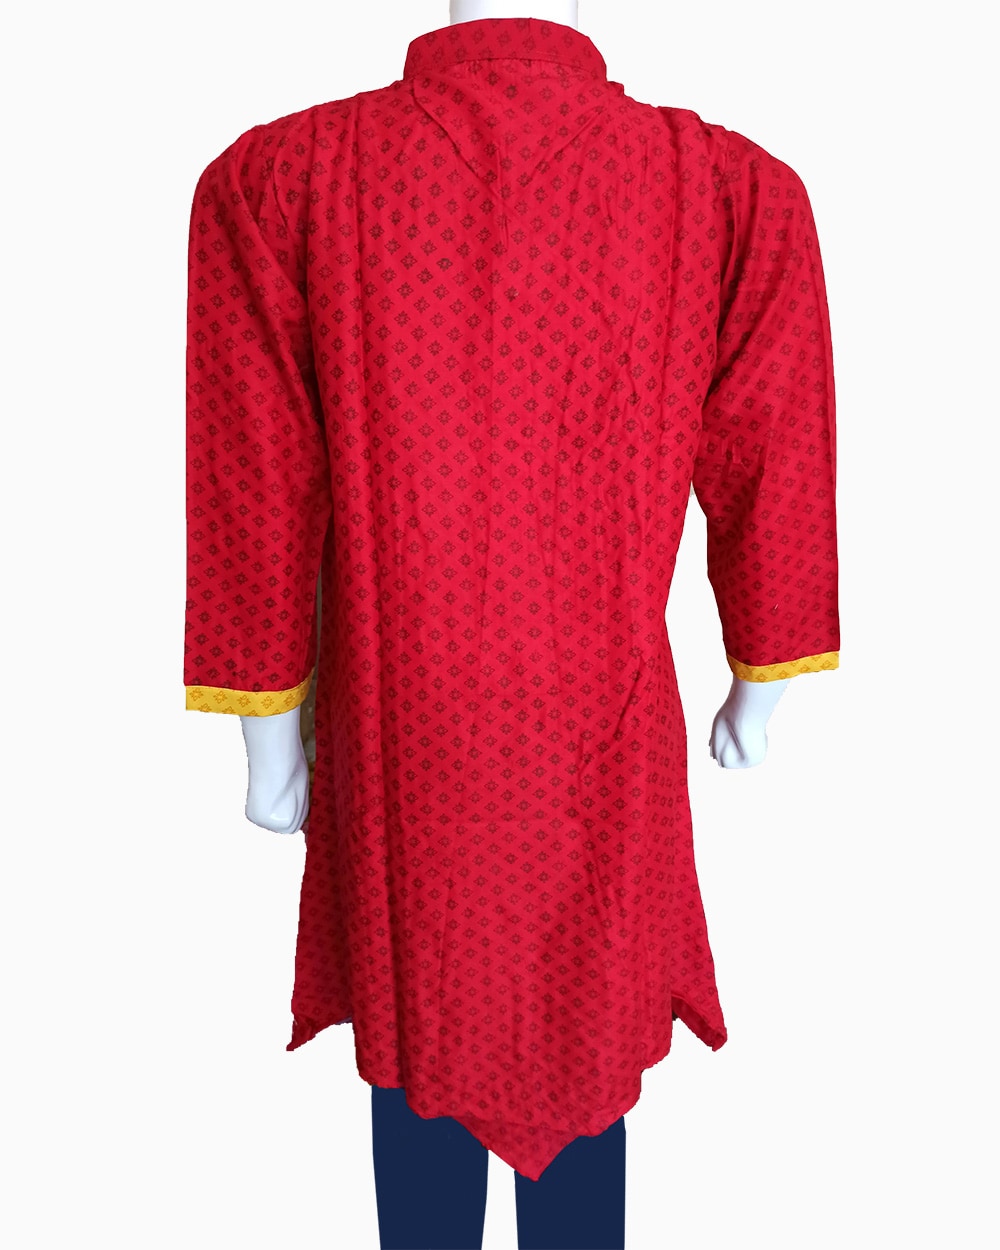 Balochi cultural embroidered shirt-all over embroidered shirt-buy cultural fashion online-red with contrast embroidered neckline (2)